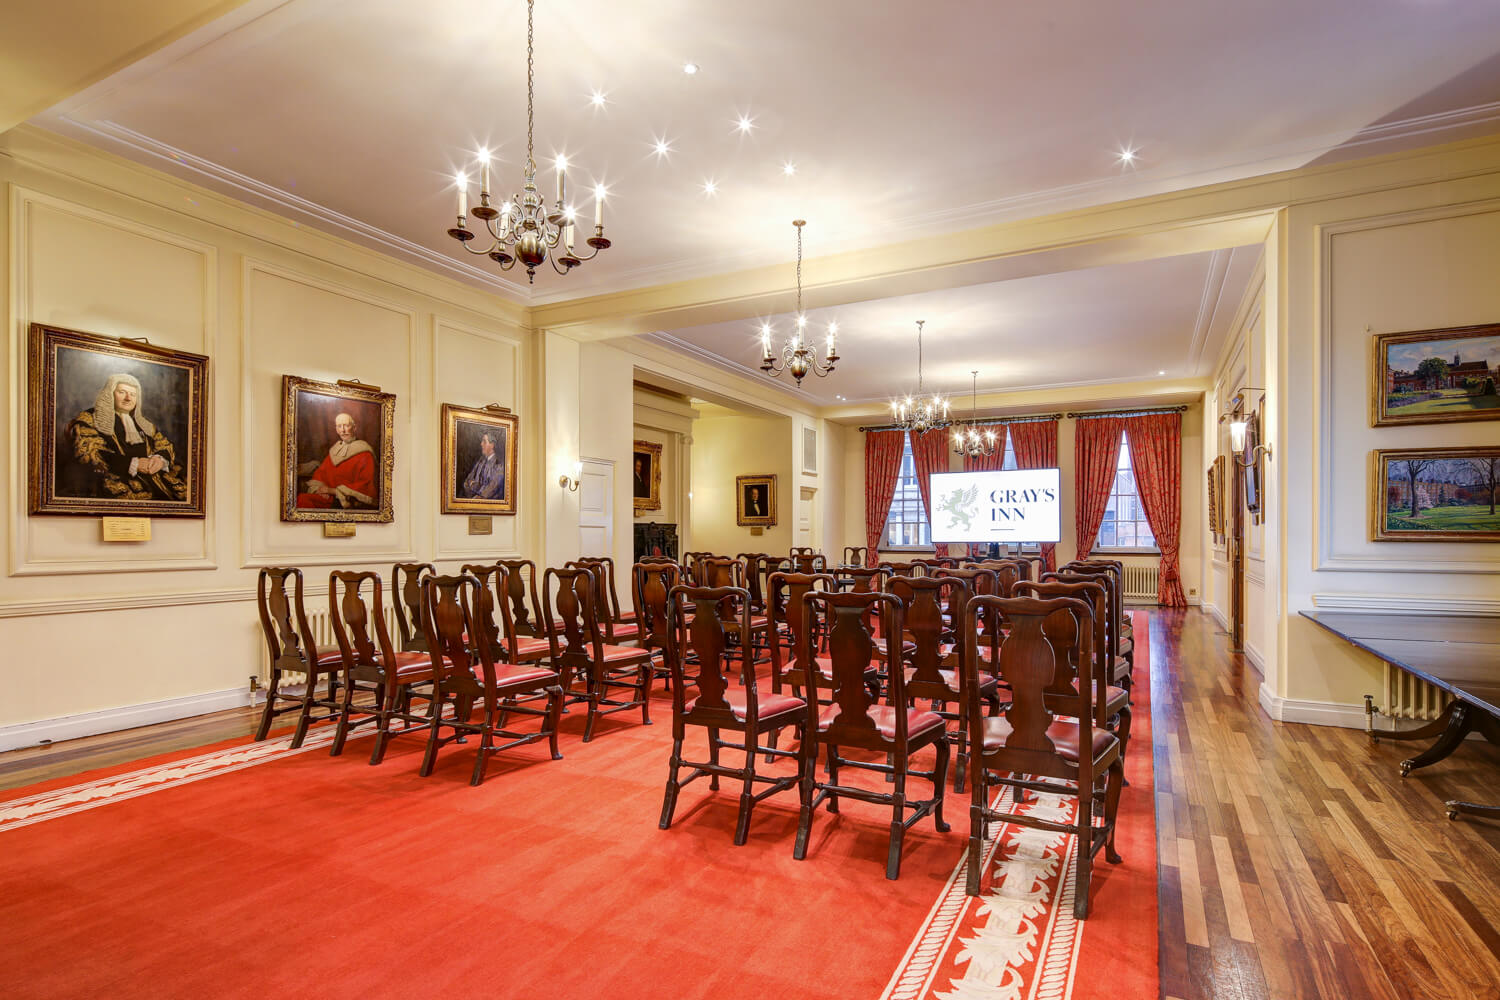 The Large Pension Room at The Gray's Inn Venue London